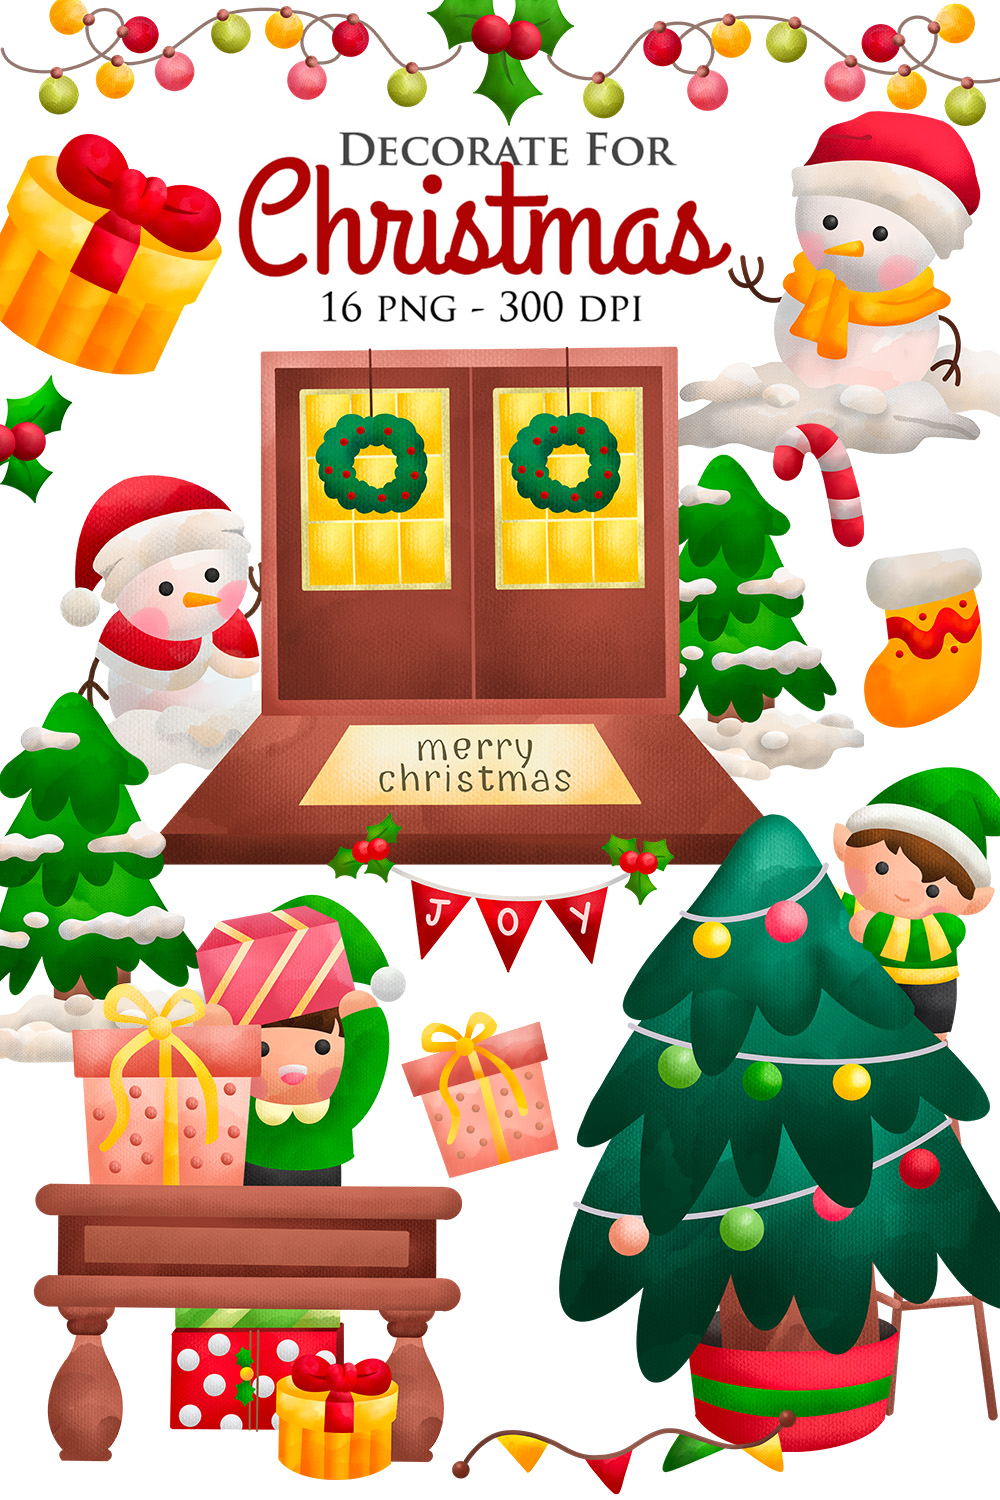 Watercolour Decorated for Christmas Holiday Celebration Ornament Background Character Snowman Santa Claus Elf Tree Cartoon Illustration Vector Clipart Sticker pinterest preview image.